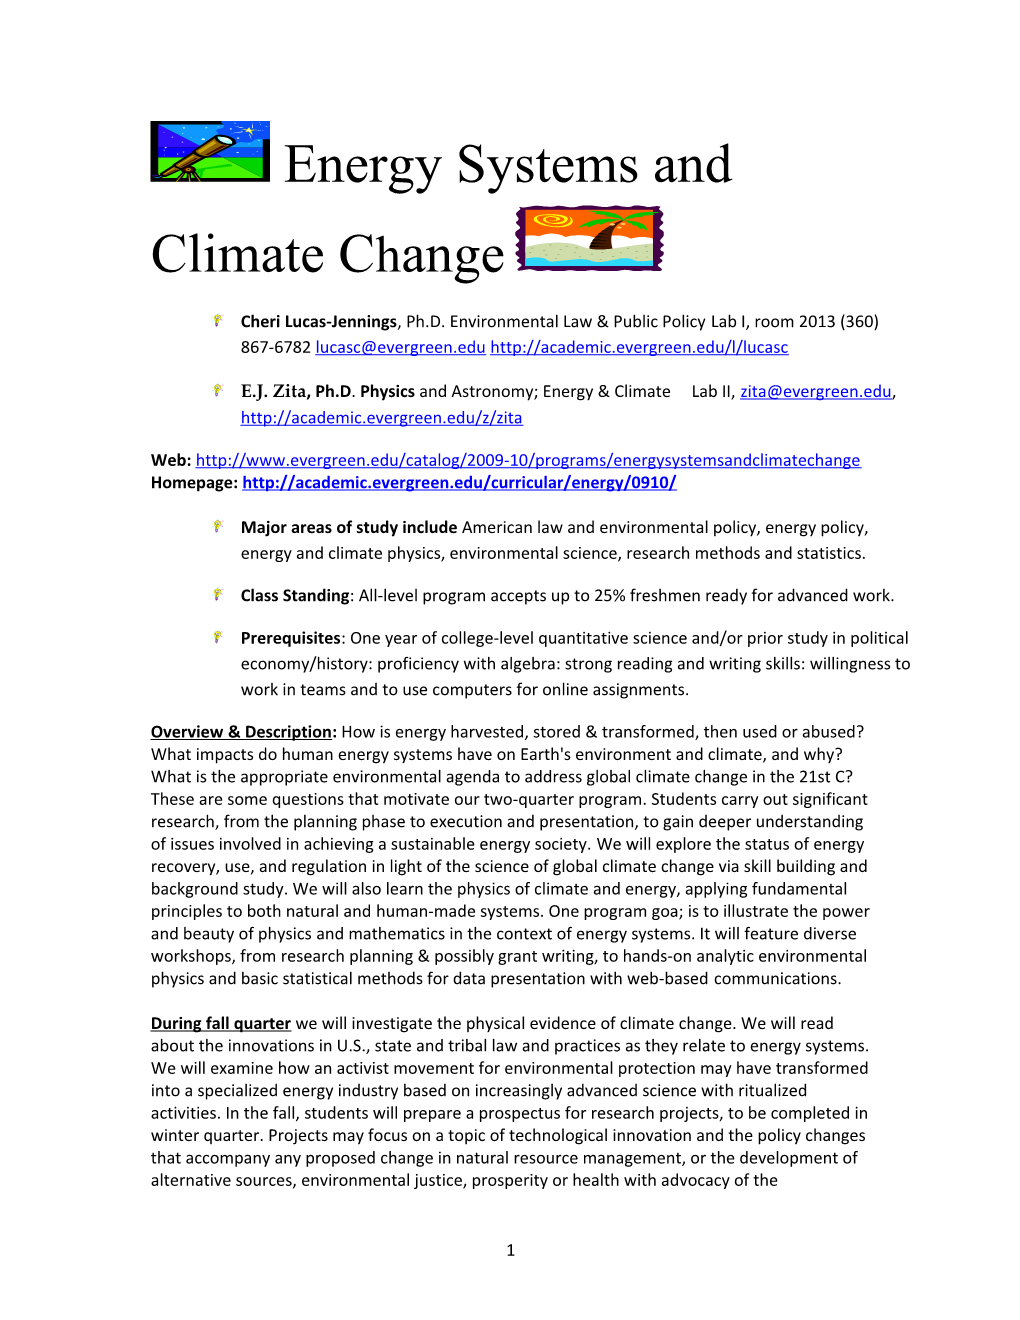 Energy Systems and Climate Change